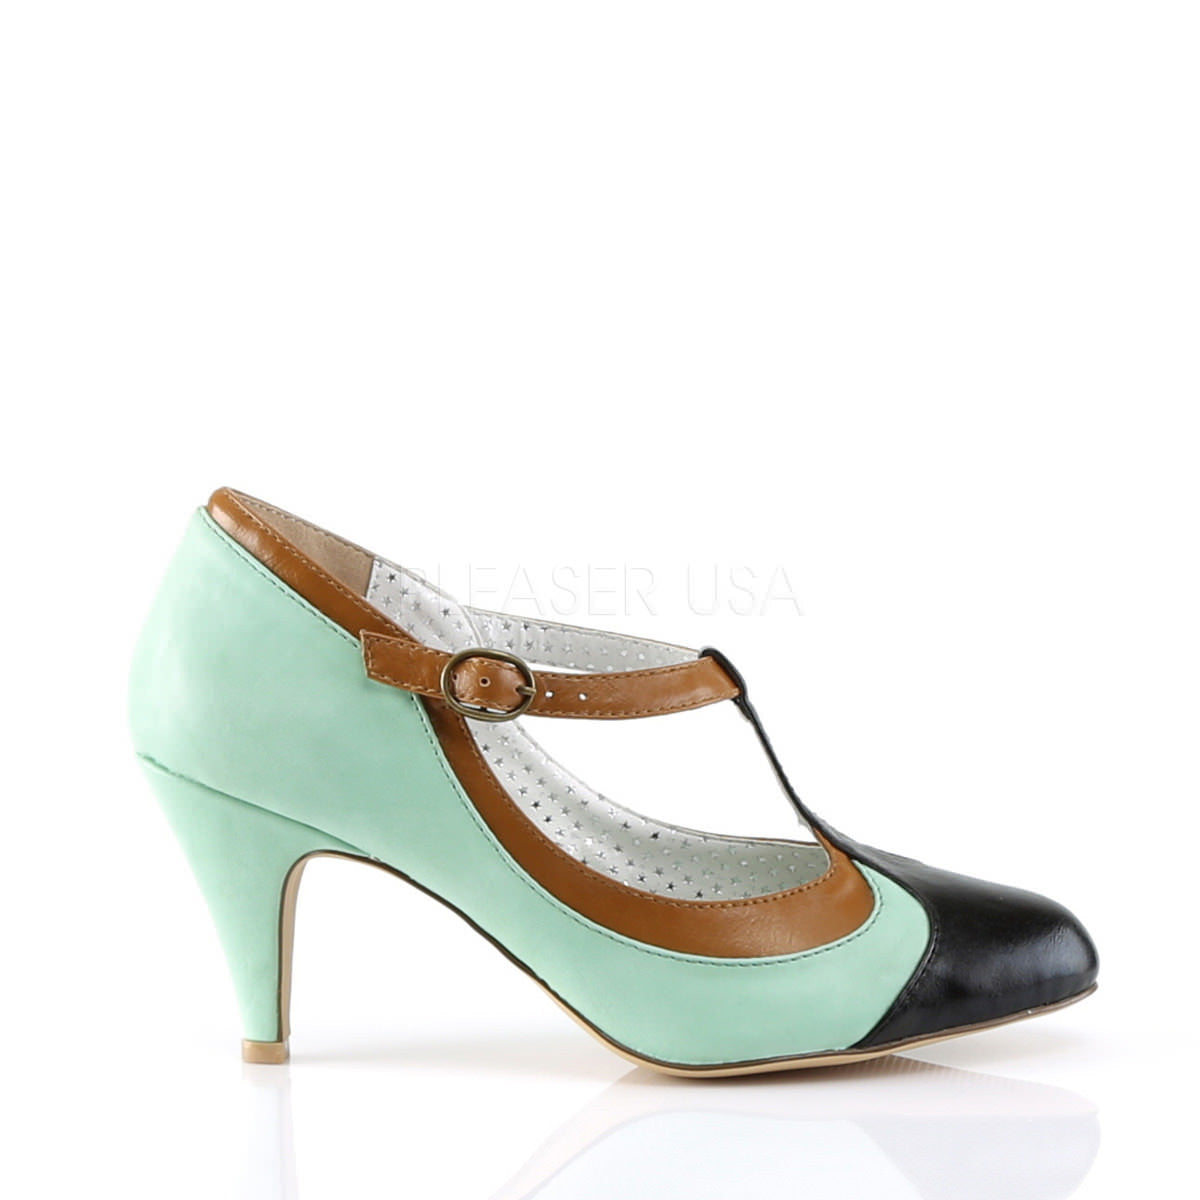 Pin Up Couture PEACH-03 Mint Retro-Inspired Pumps - Shoecup.com - 3